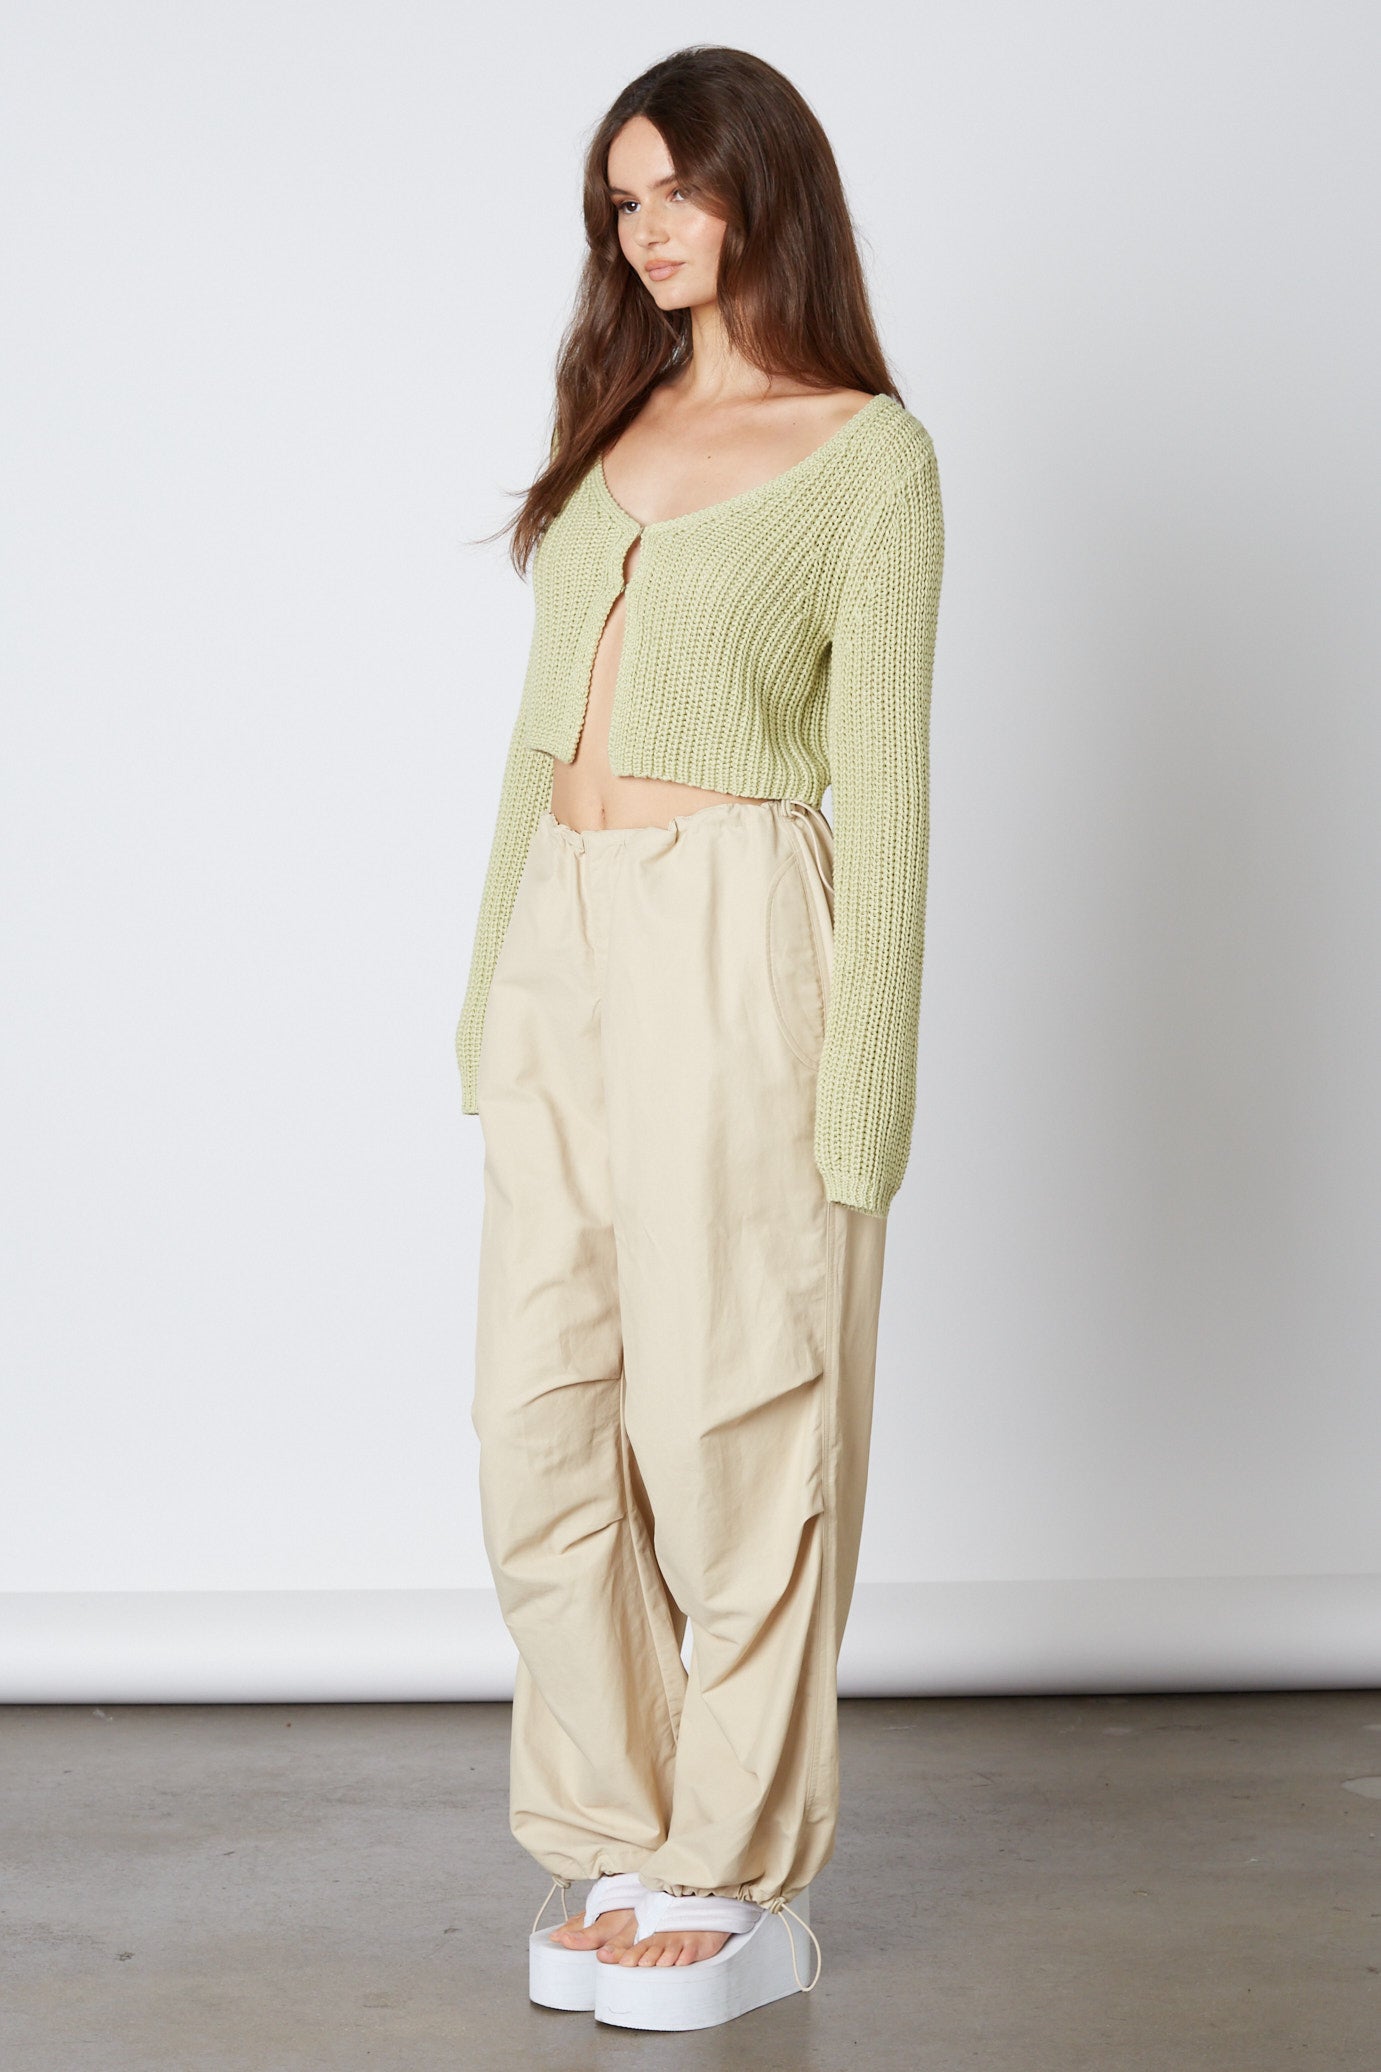 Mid-Rise Parachute Pant in Tan Side